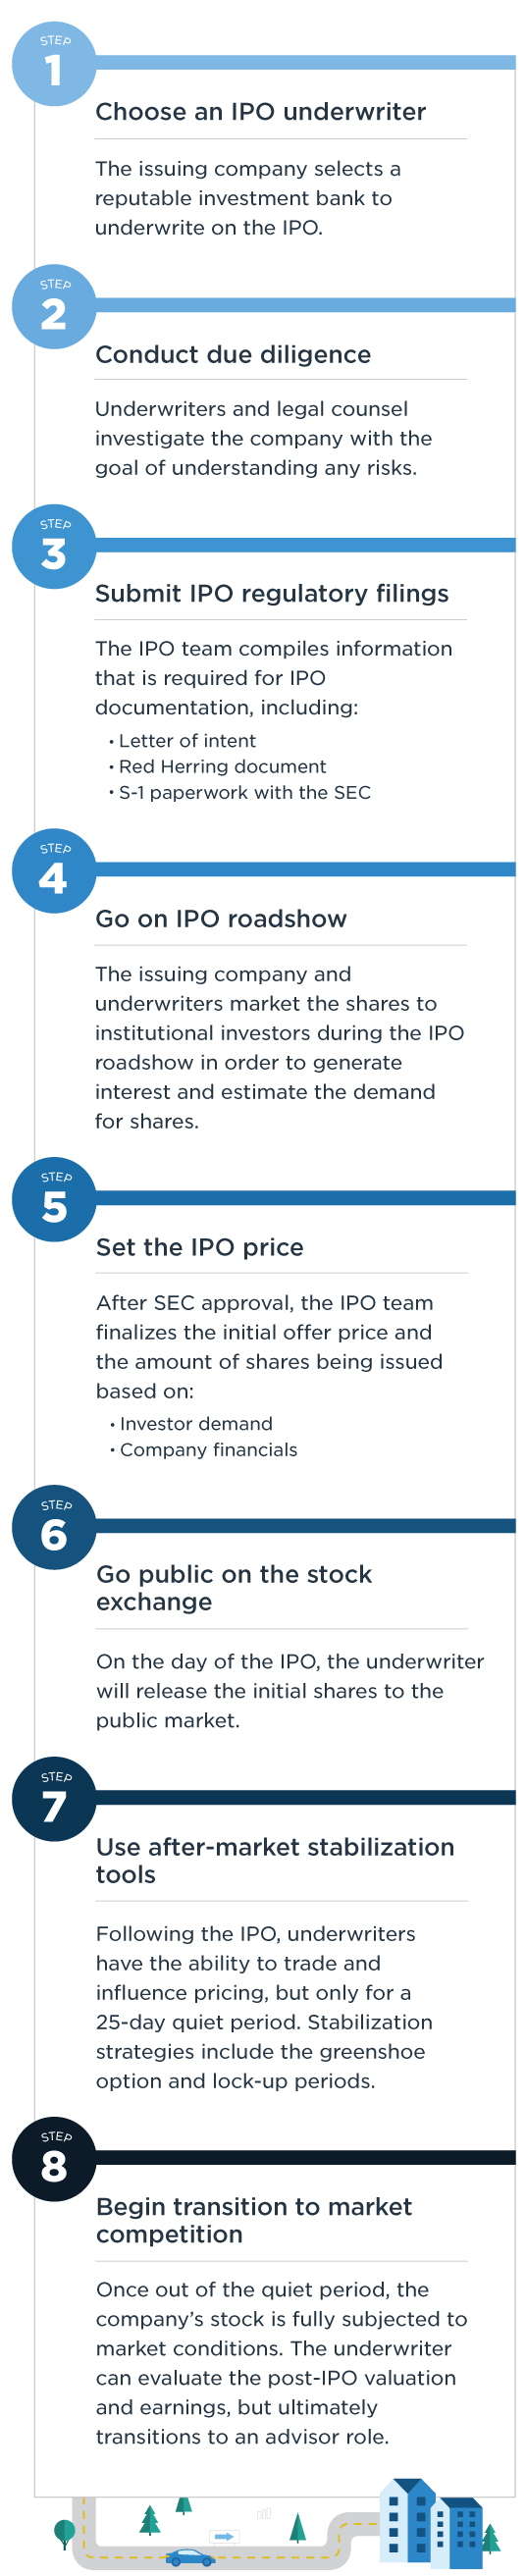 Requirements to go public ipo lease option investing strategies